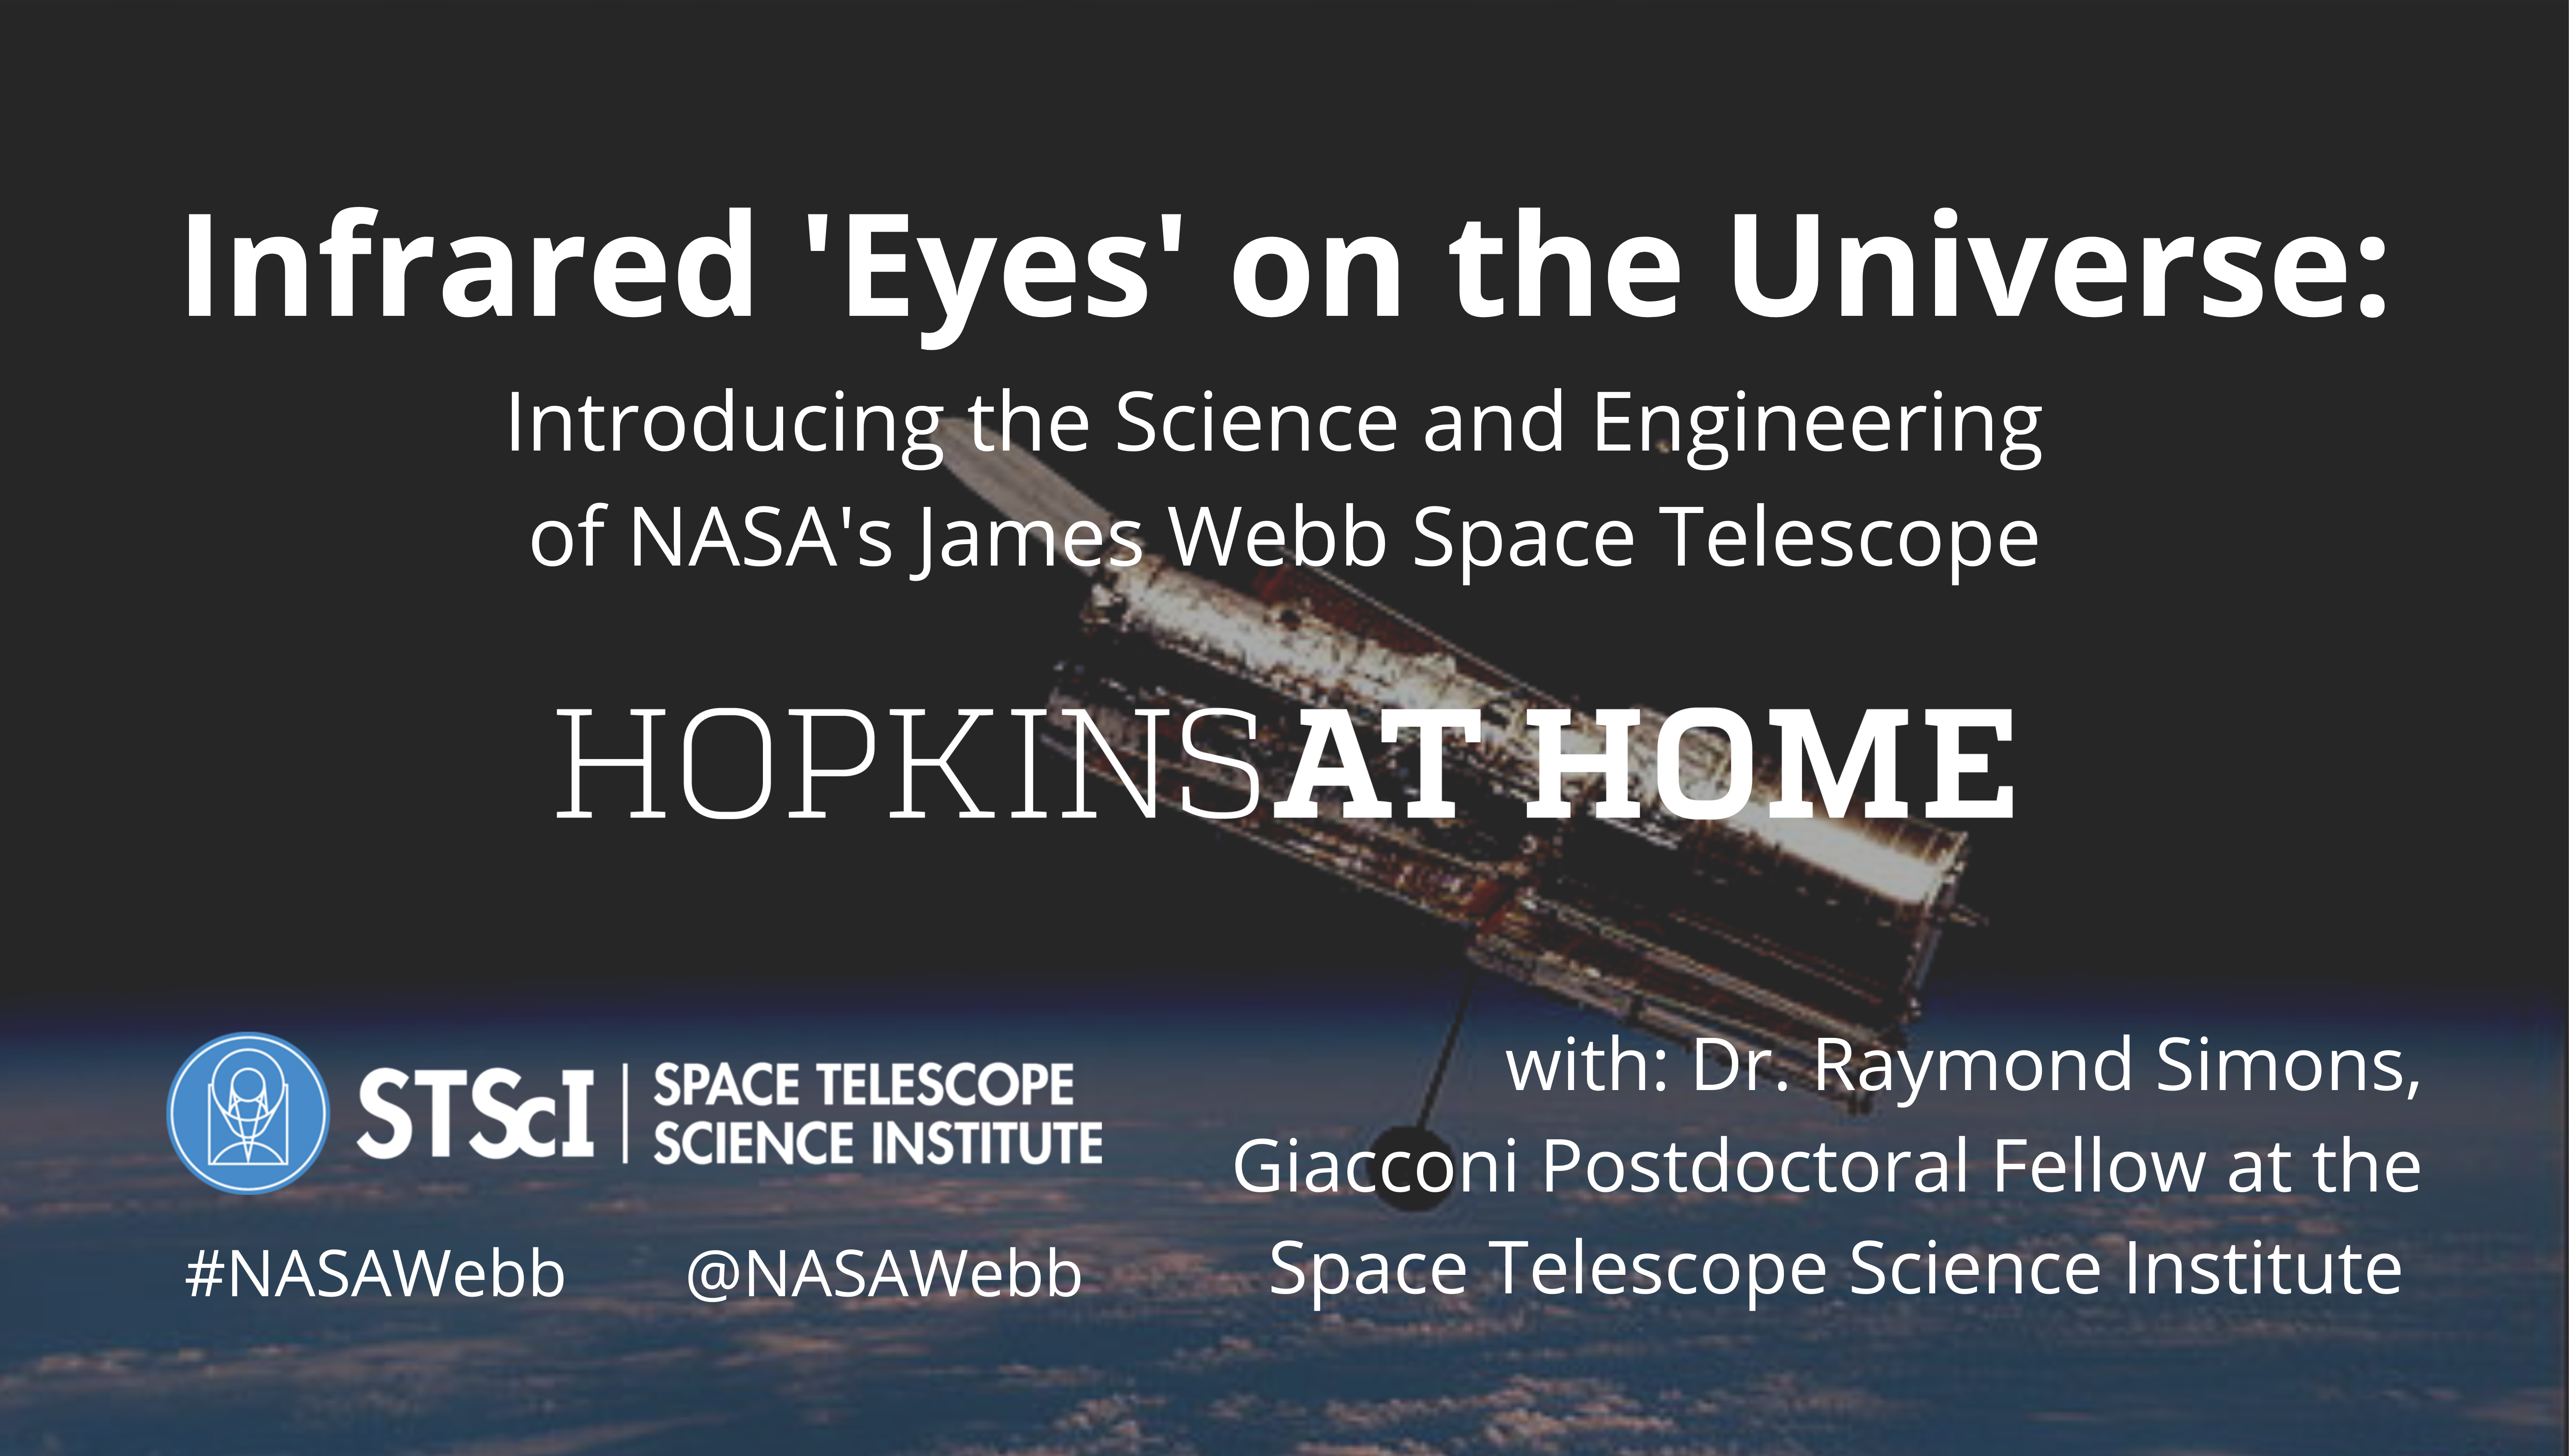 Infrared 'Eyes' on the Universe: Introducing the Science and Engineering of NASA's James Webb Space Telescope